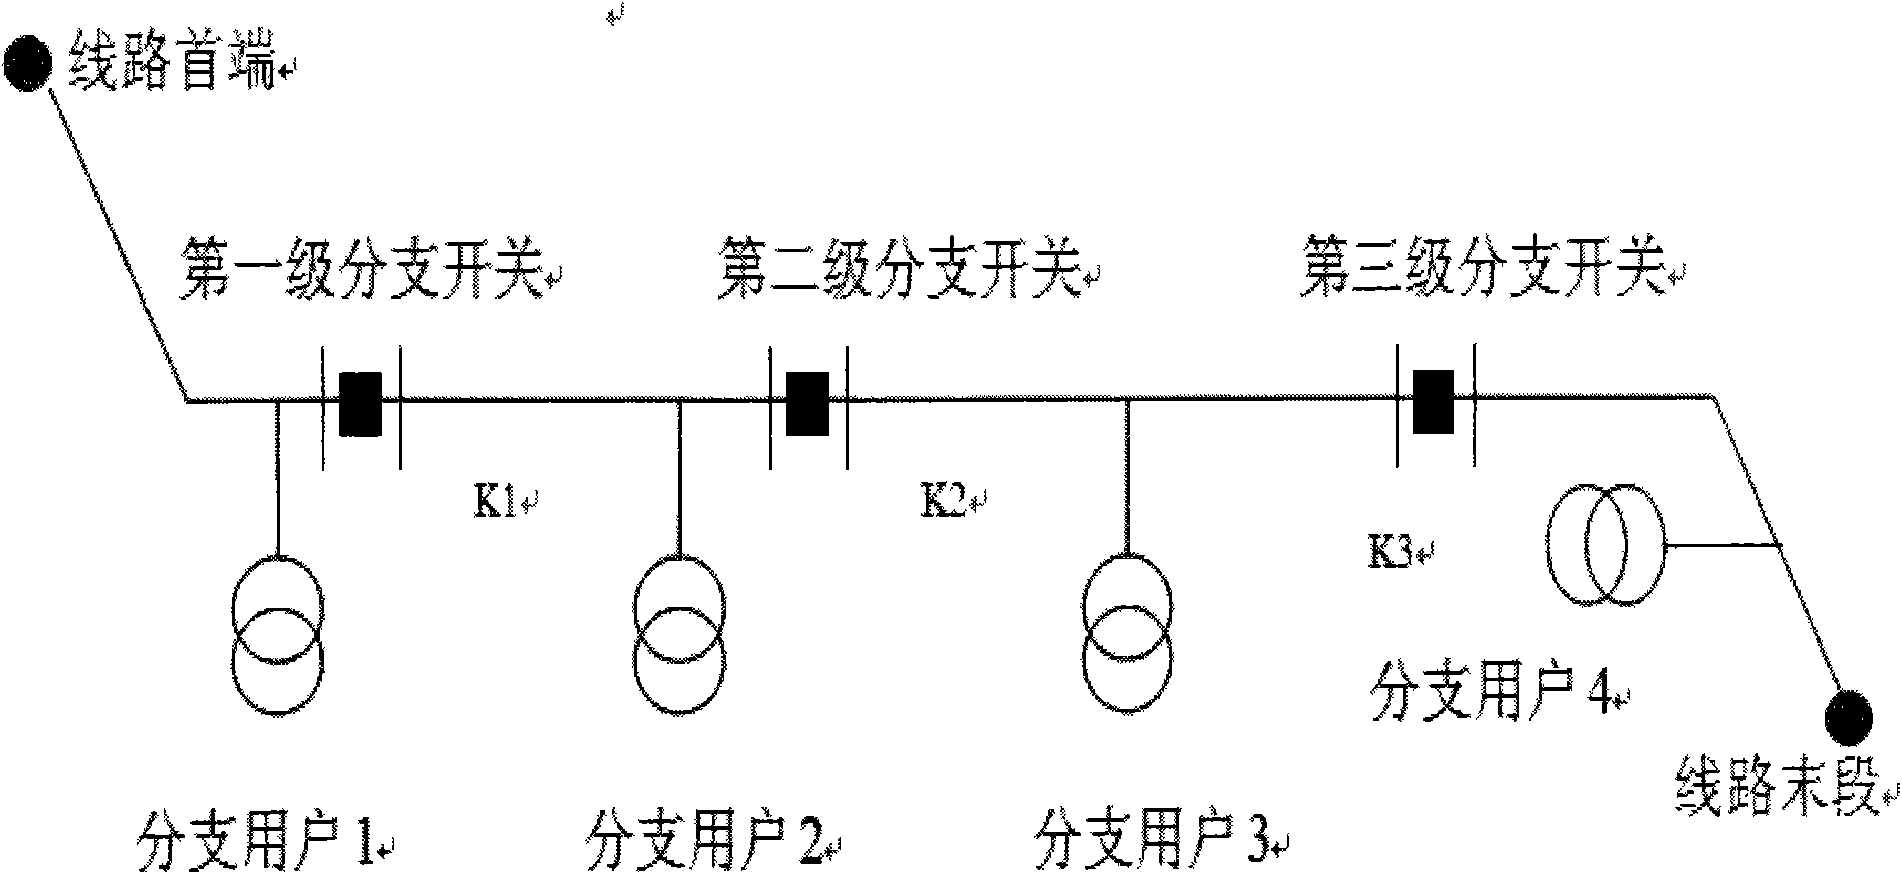 Searching method for grounded point of low current grounding system of rural power grid